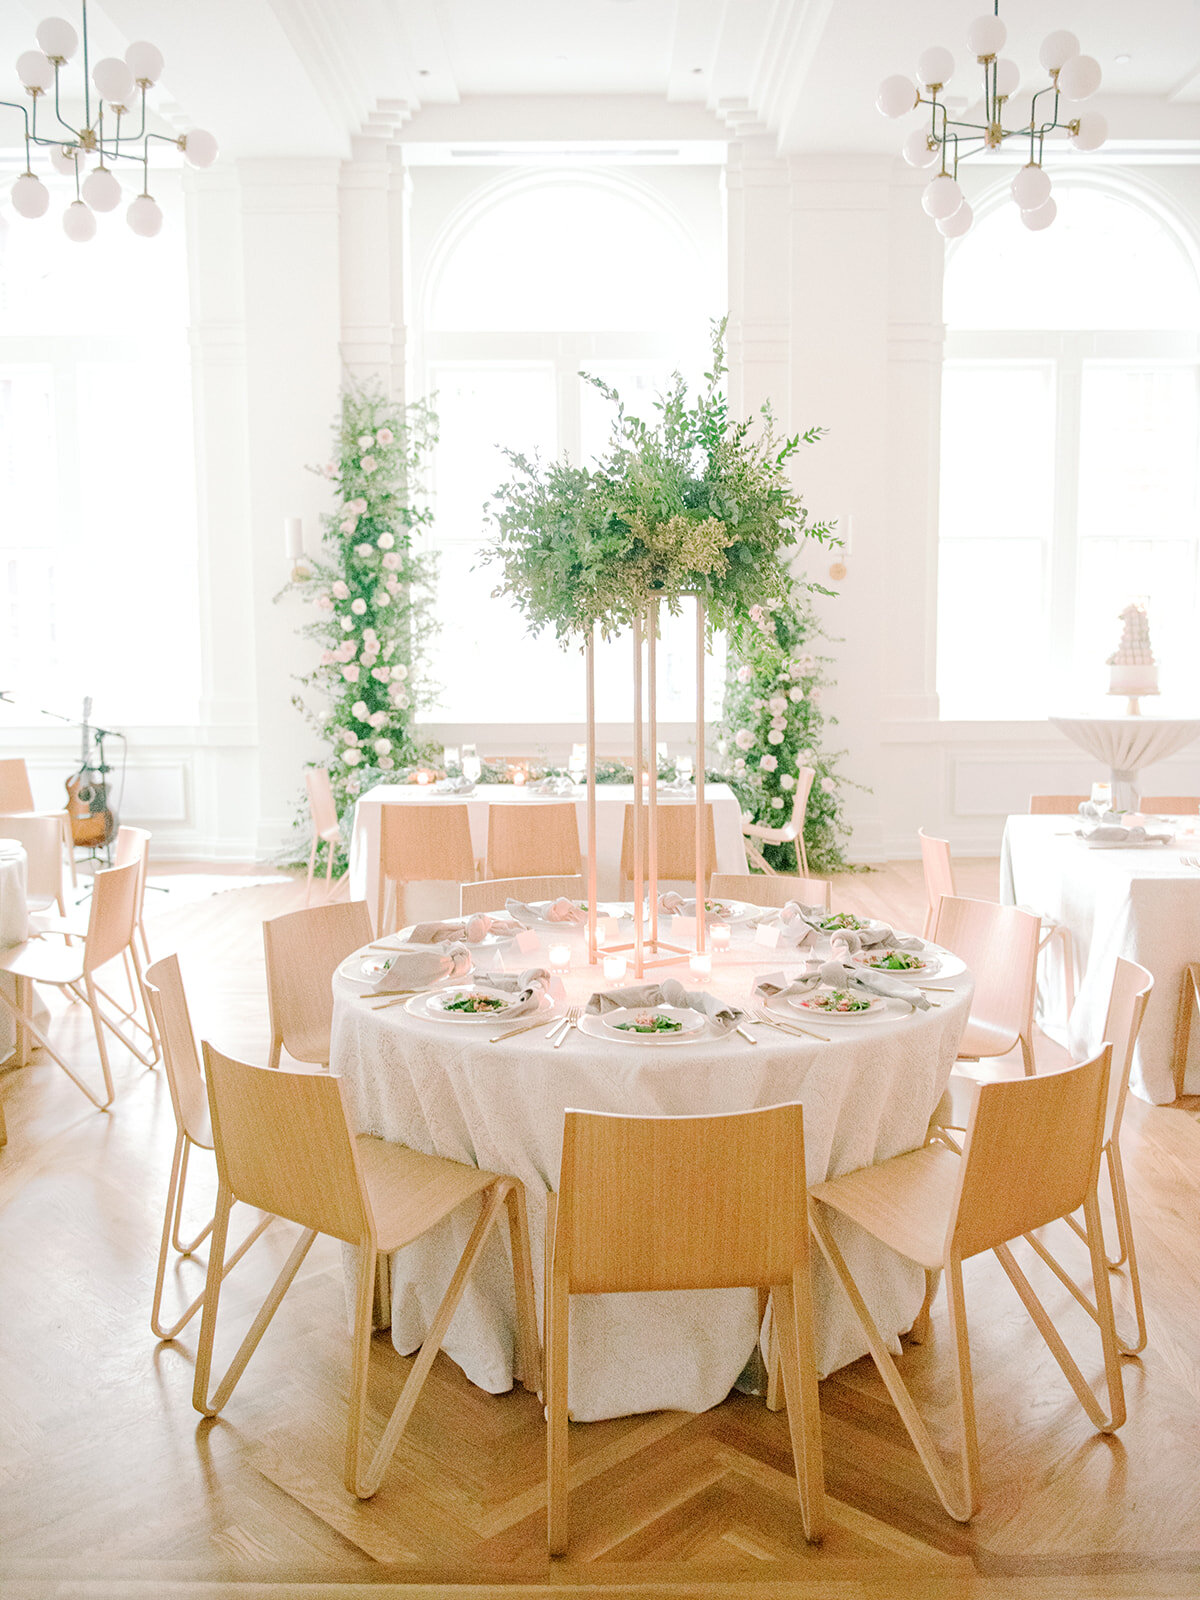 All greenery arrangement on modern gold stand for an elegant blush and cream wedding at the Noelle, Nashville.